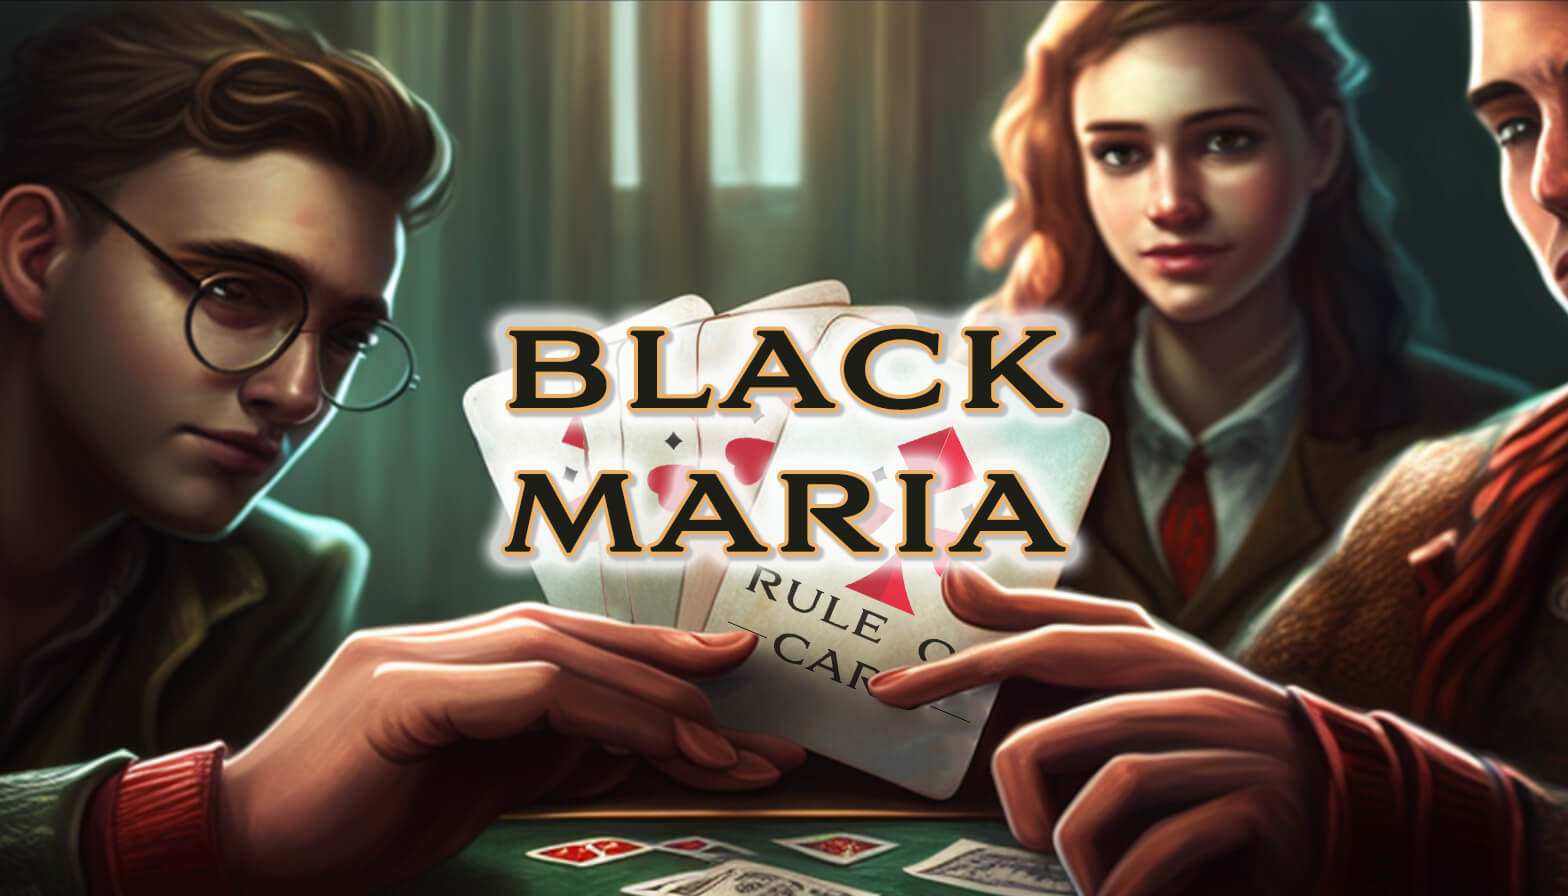 Playing the card game Black Maria